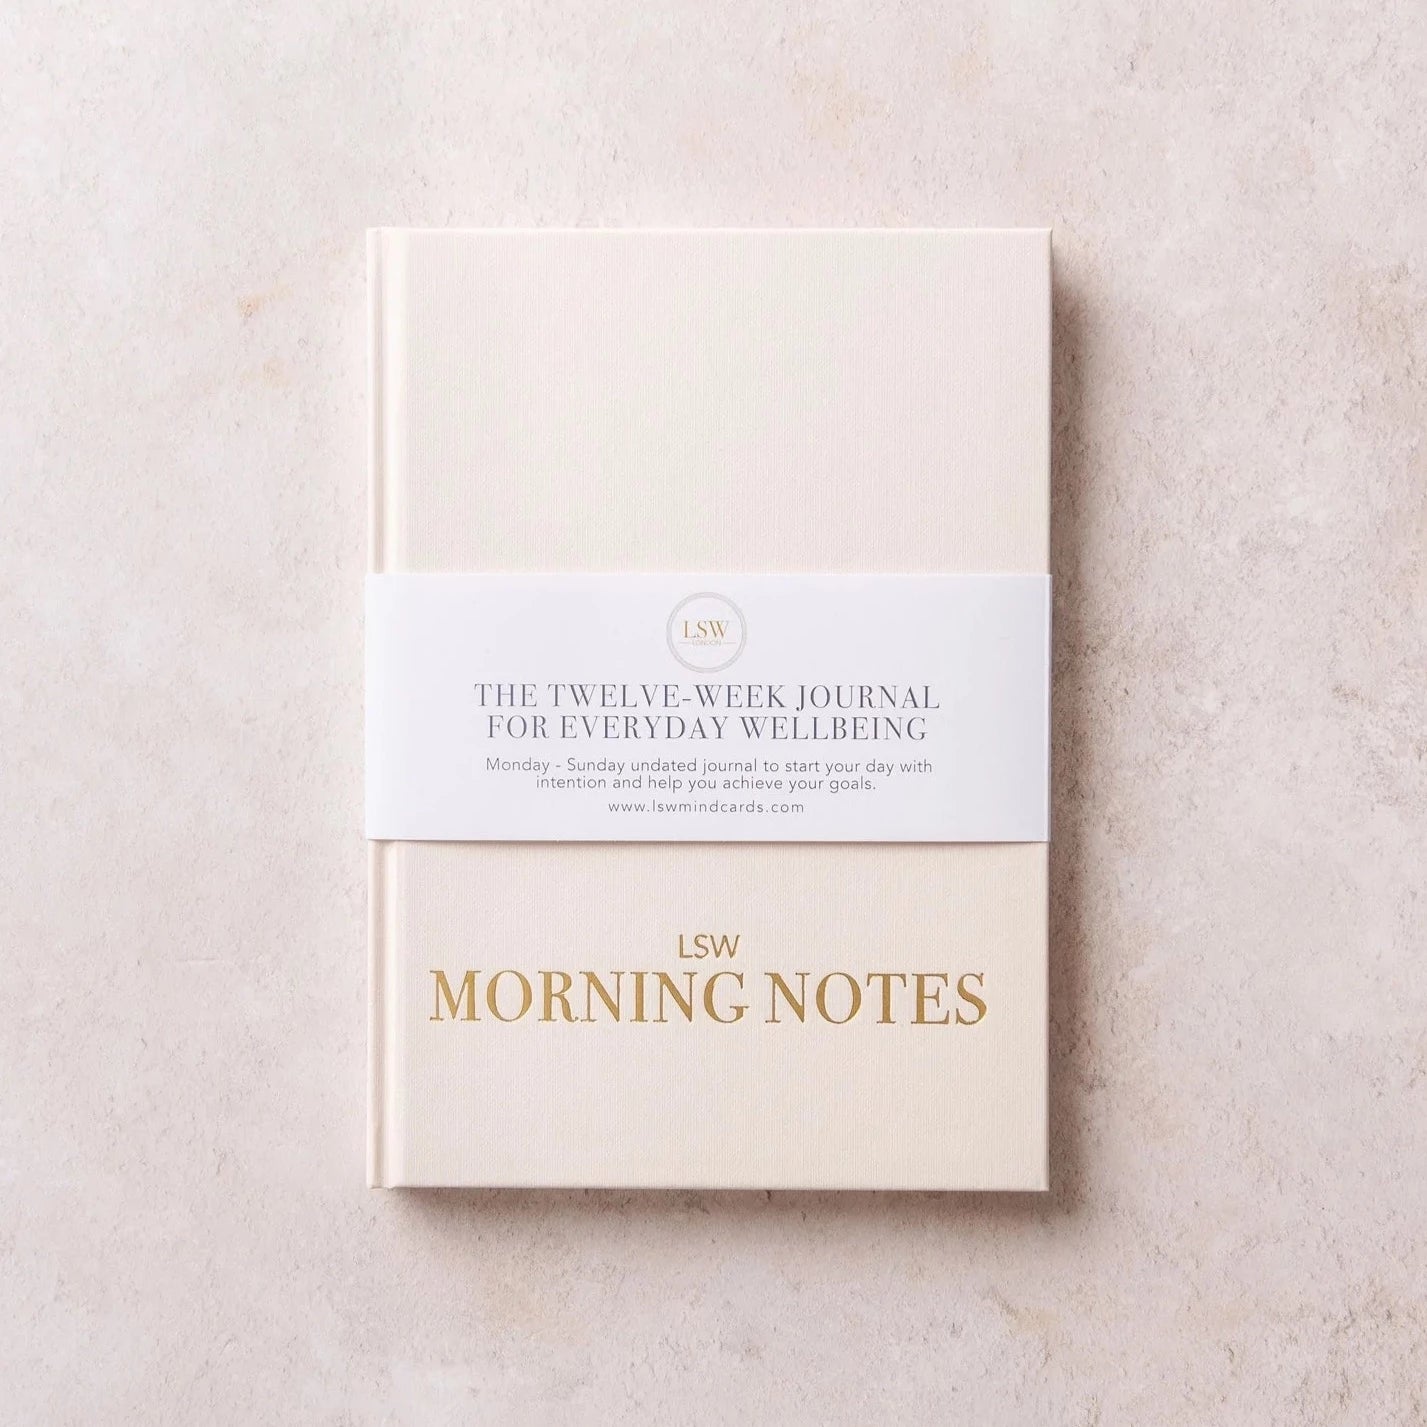 LSW Morning Notes By LSW London